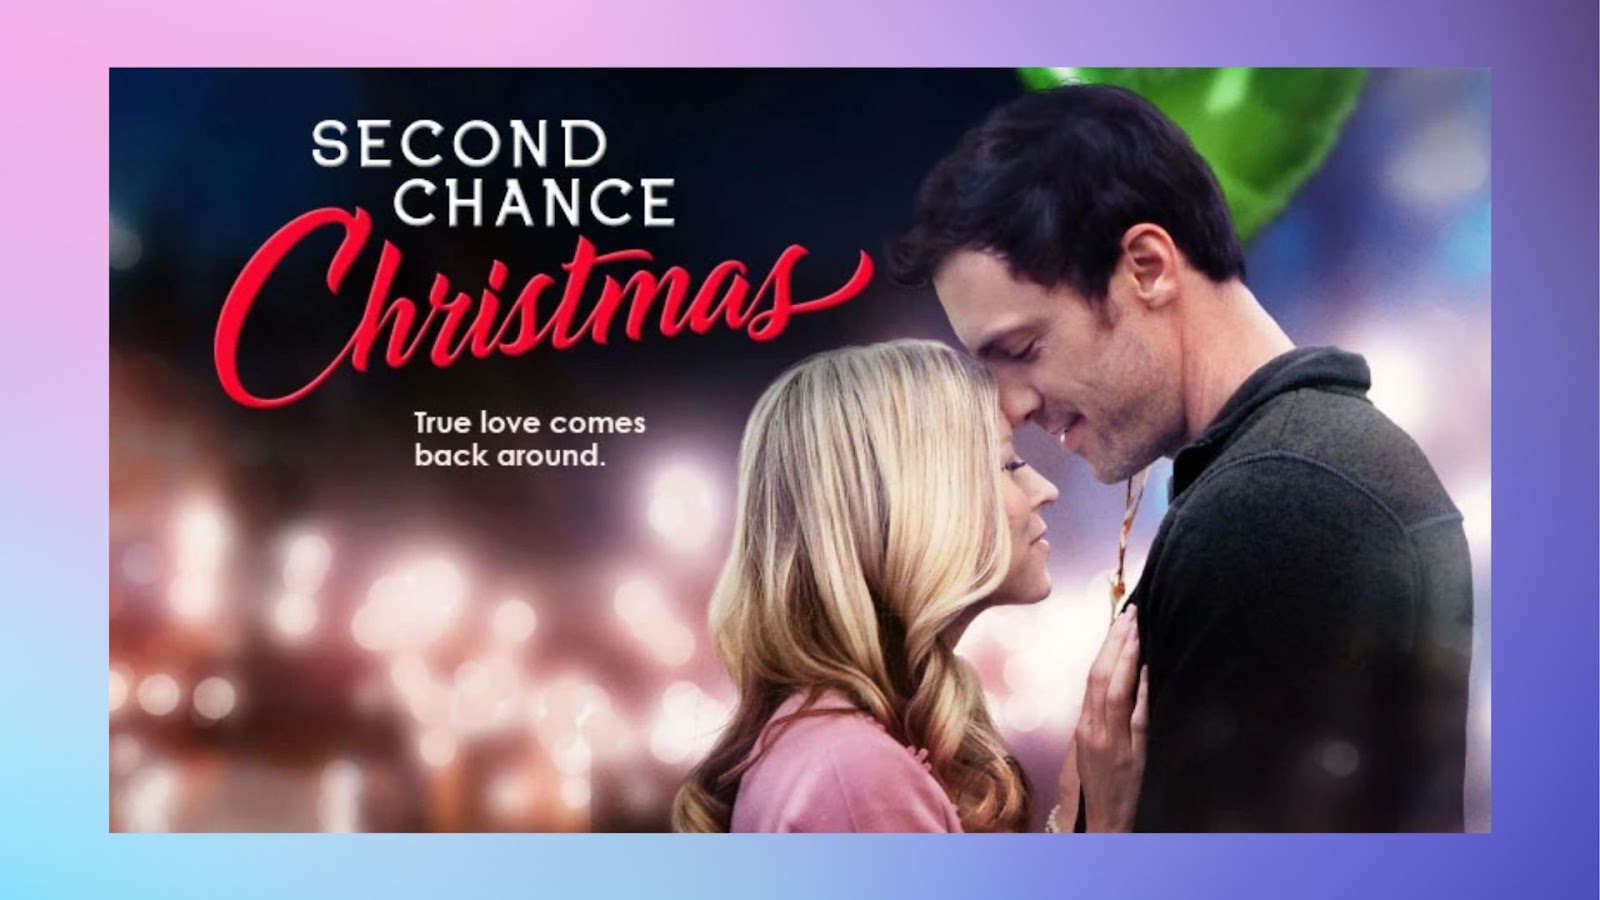 Christian Movies on Hulu - Second Chance at Christmas